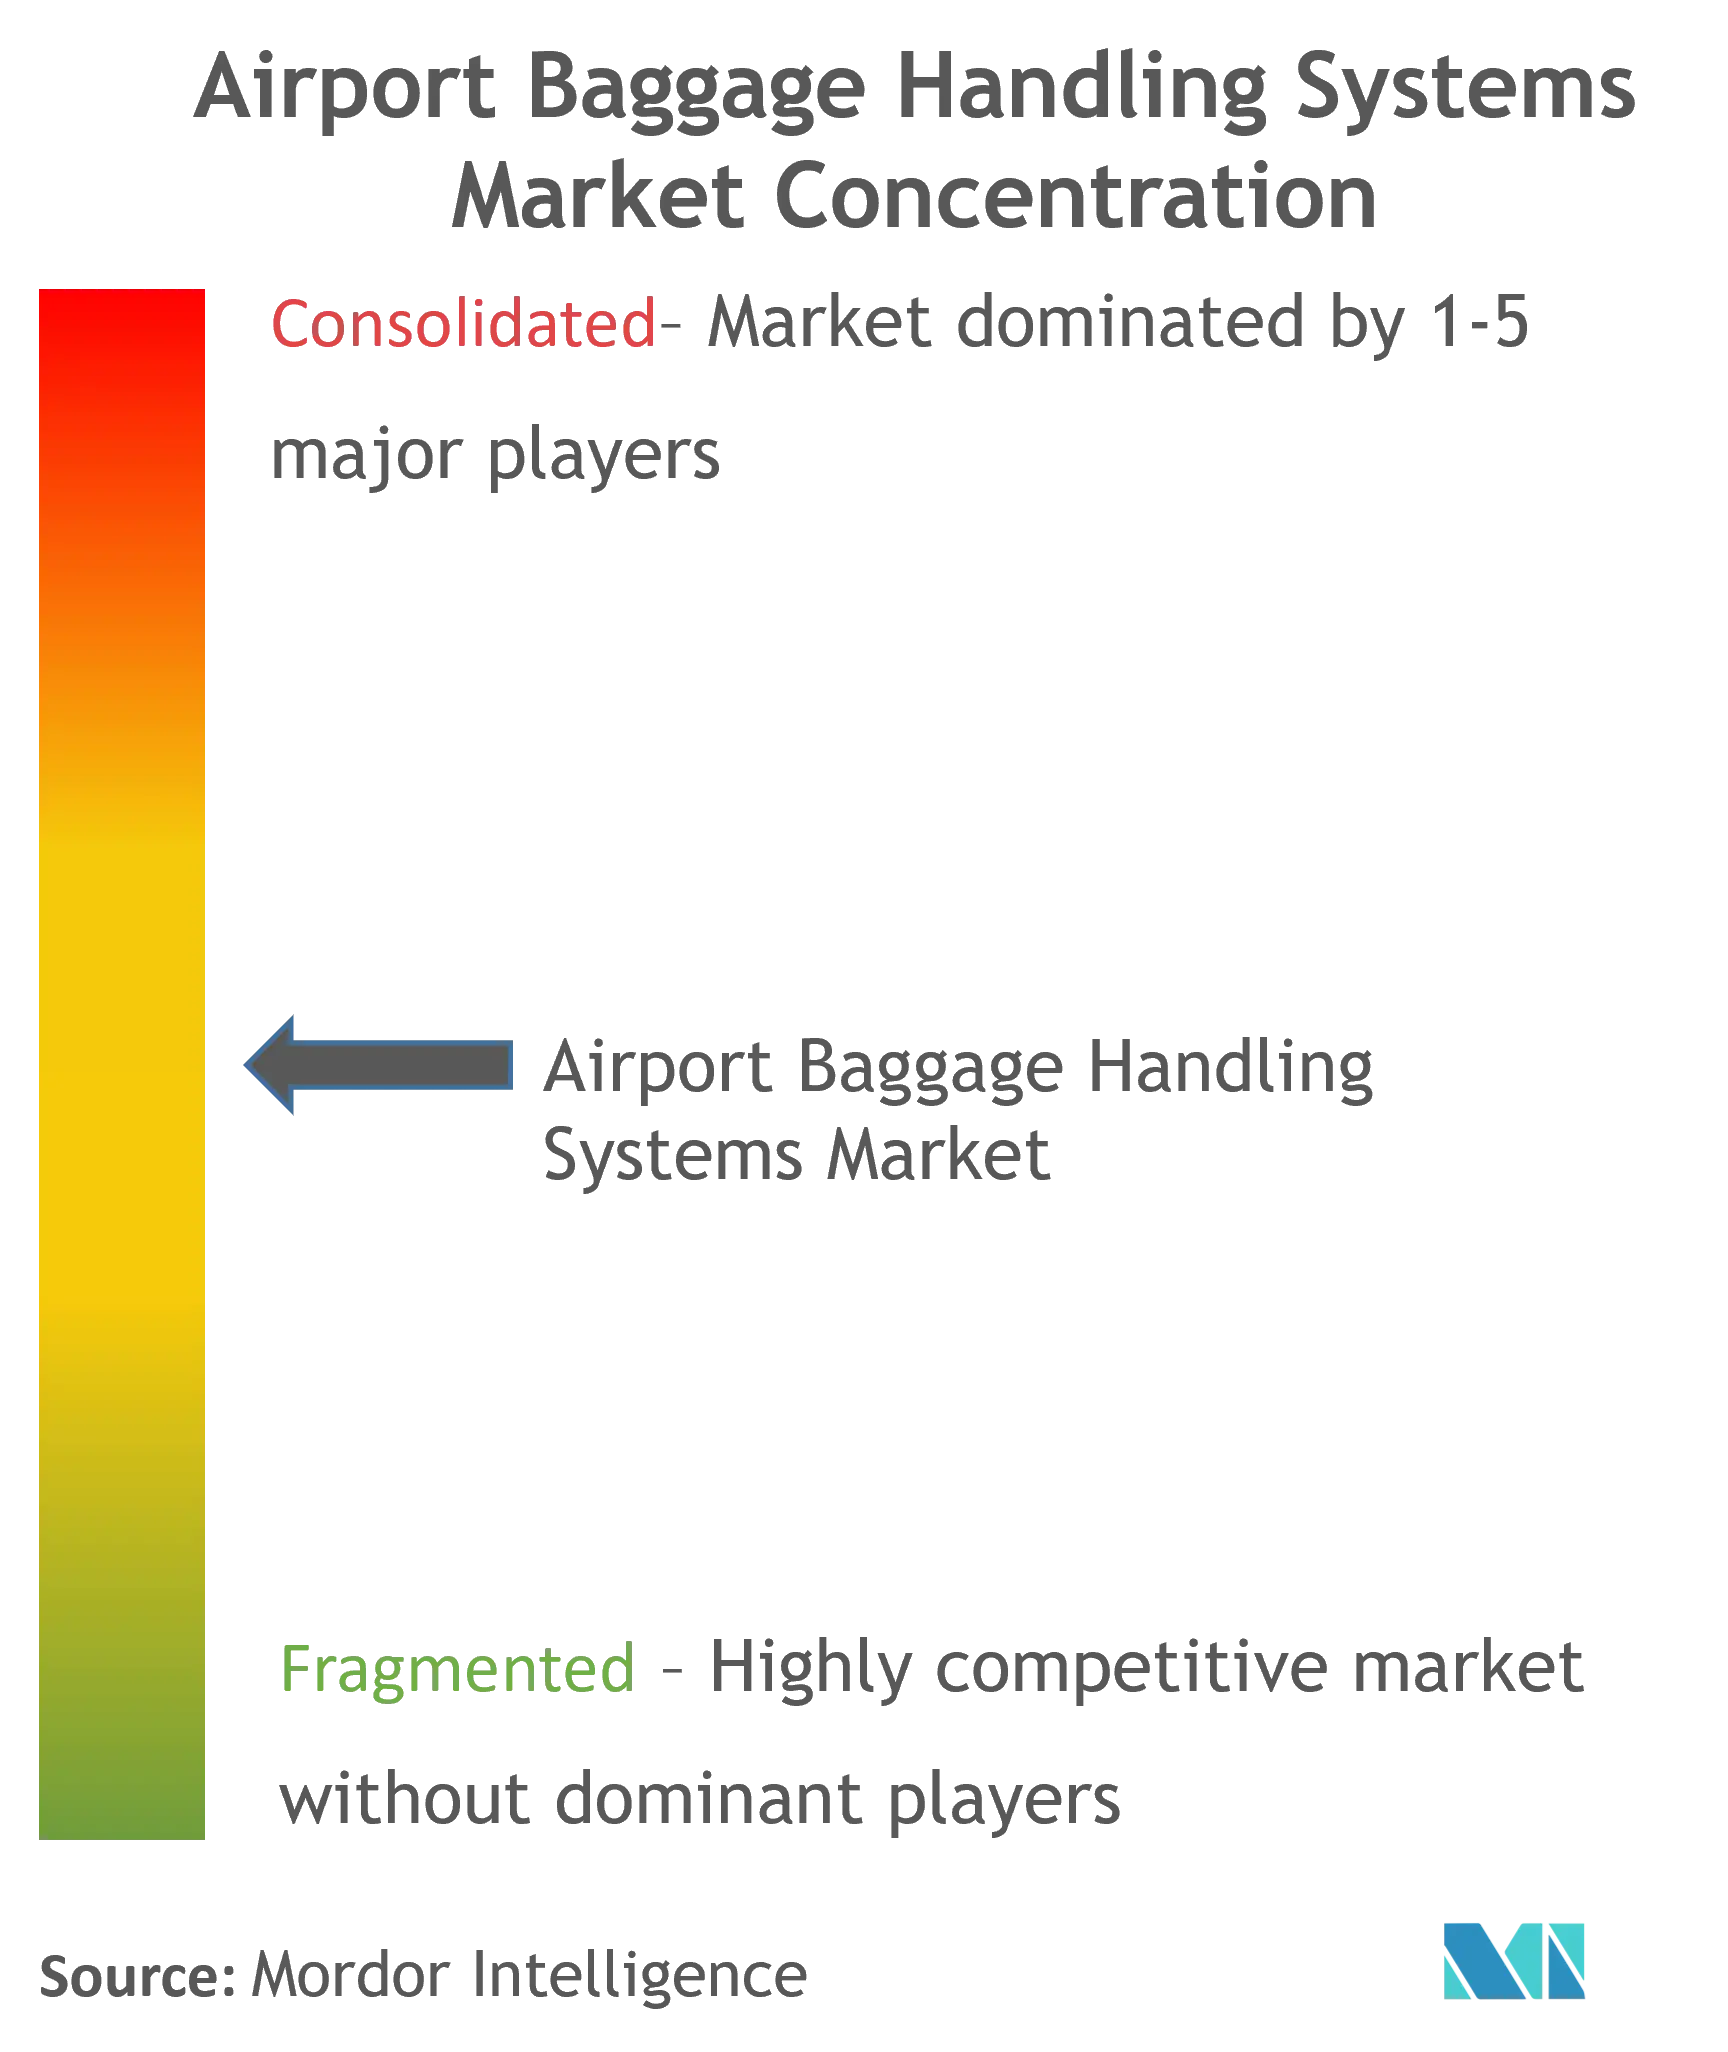 Airport Baggage Handling Systems Market Concentration